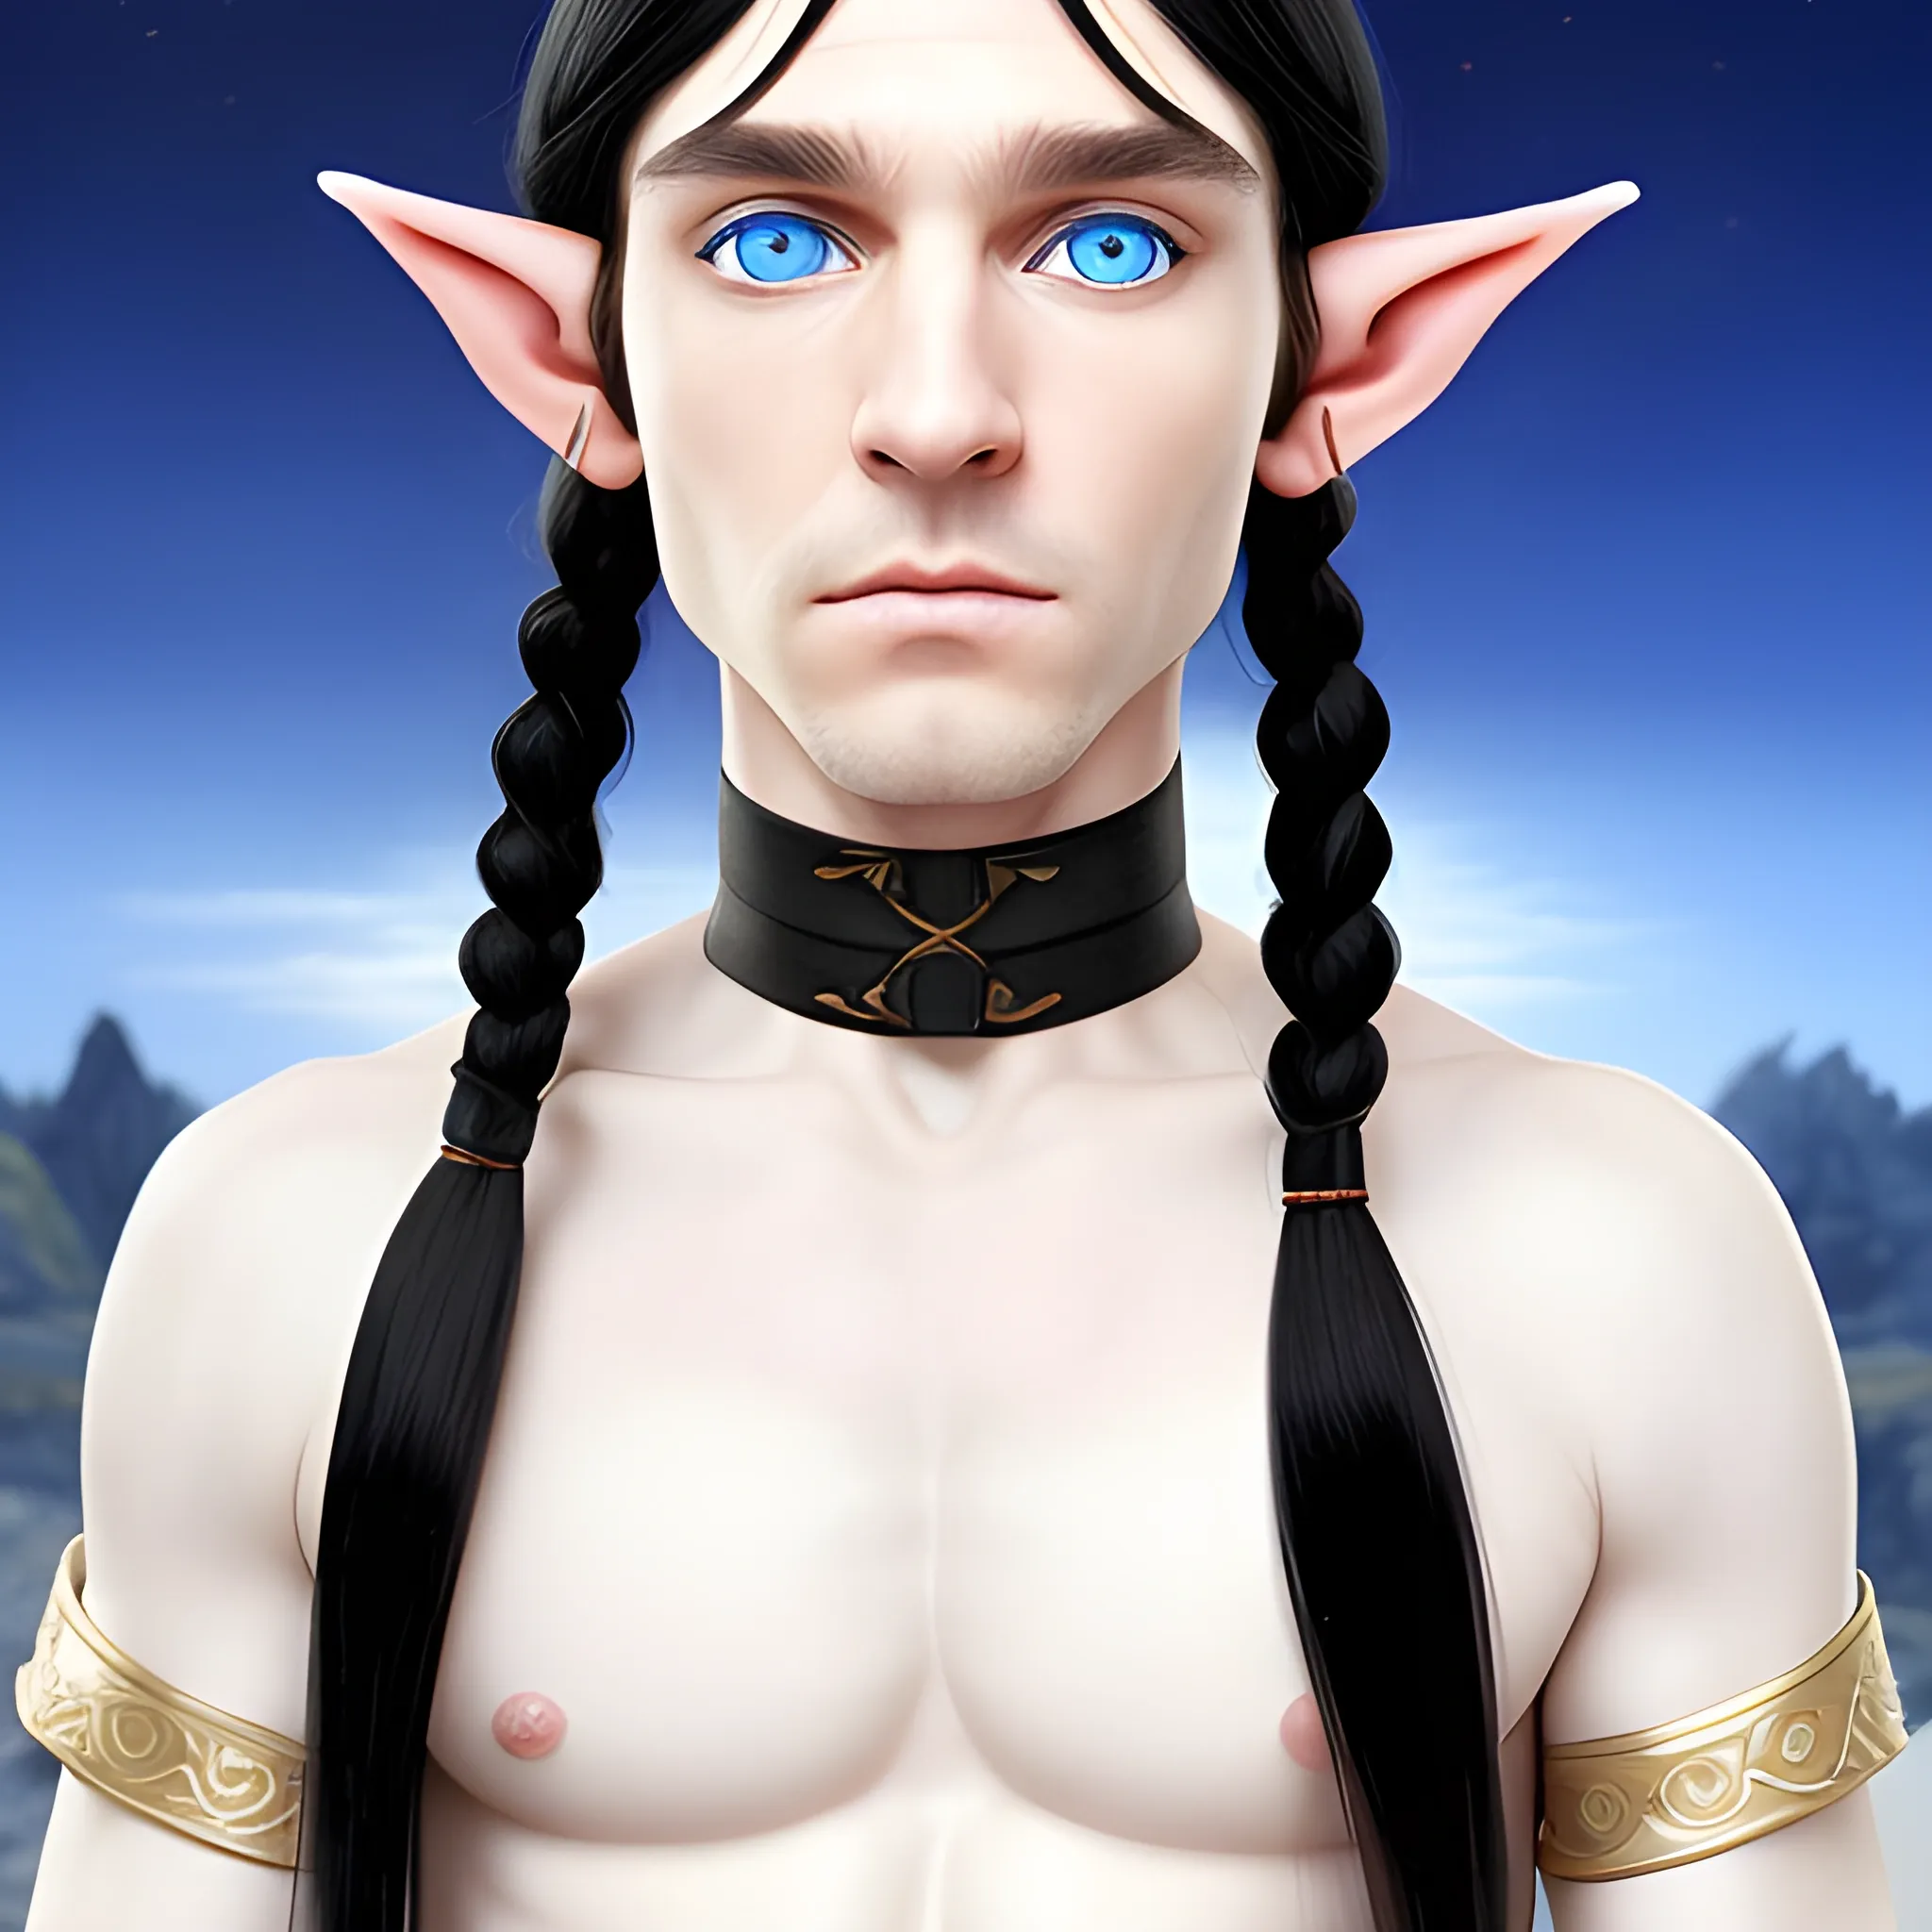 An elf, white skin, blue eyes, black hair, two long pigtails that go down to his chest, he wears a tunic, full view of him 